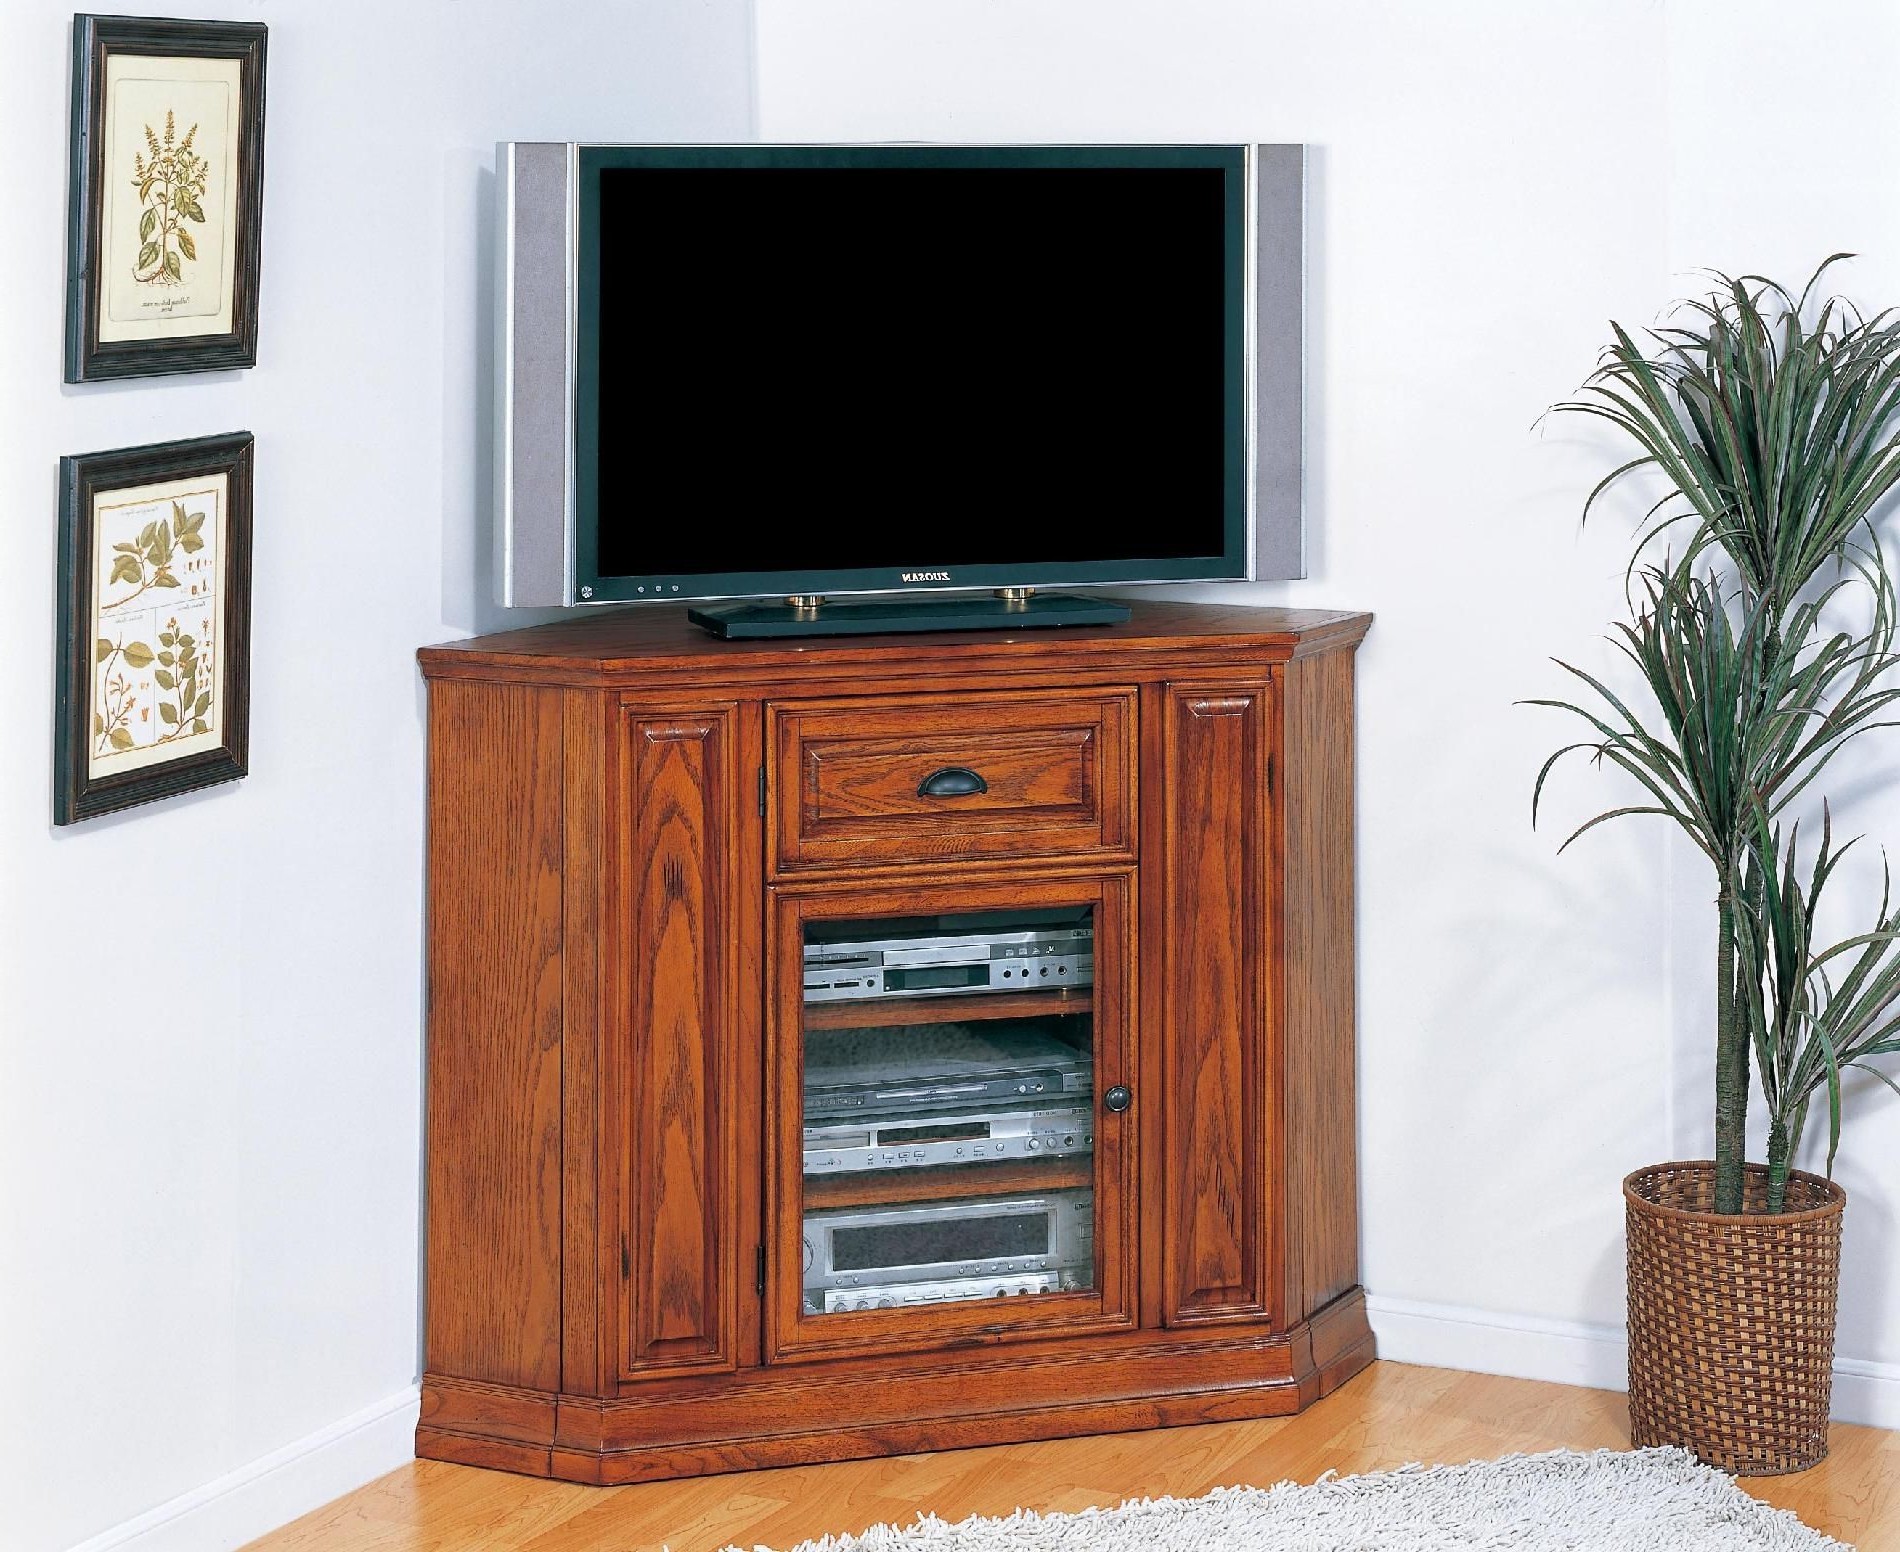 Best 20 of corner tv cabinets for flat screens with